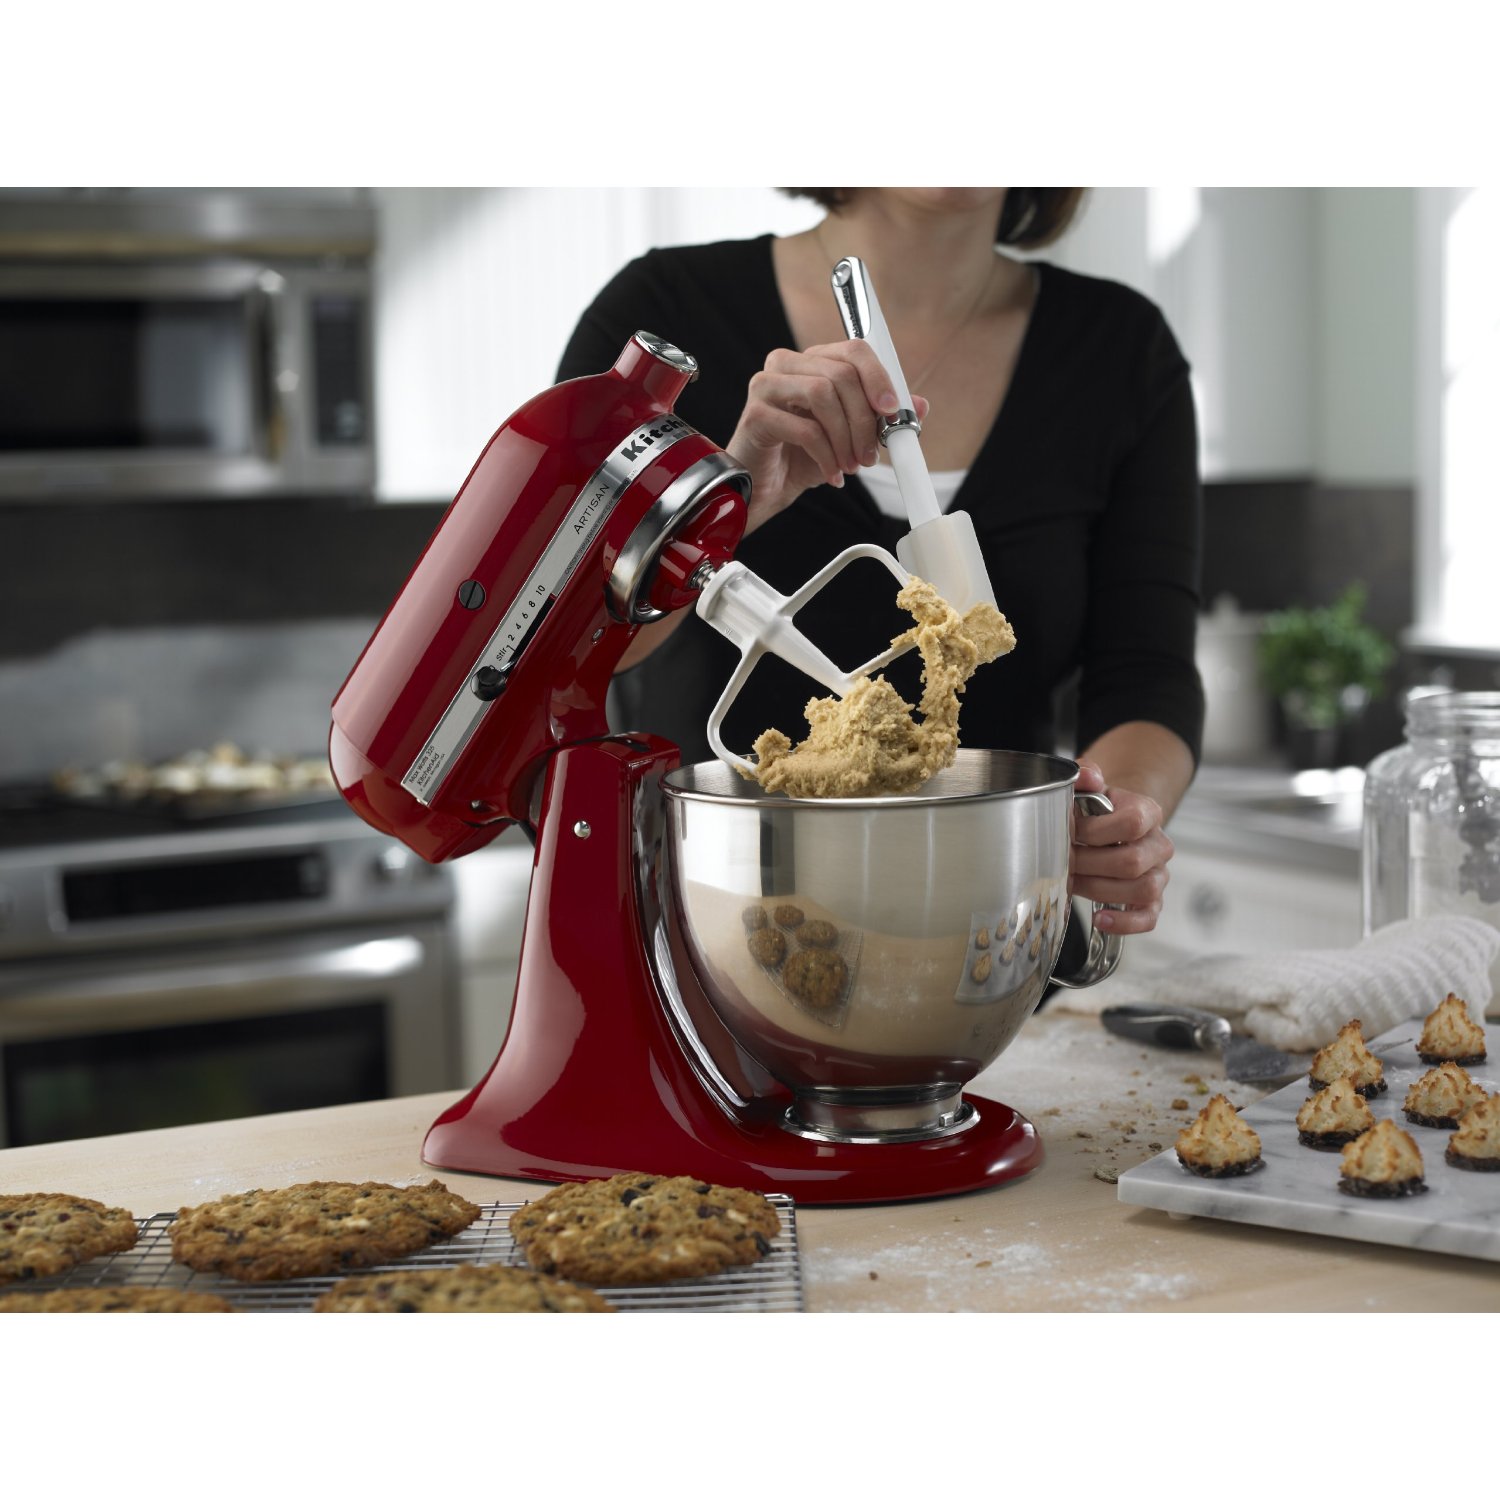 Fun food gadgets offer all-in-one wizardry